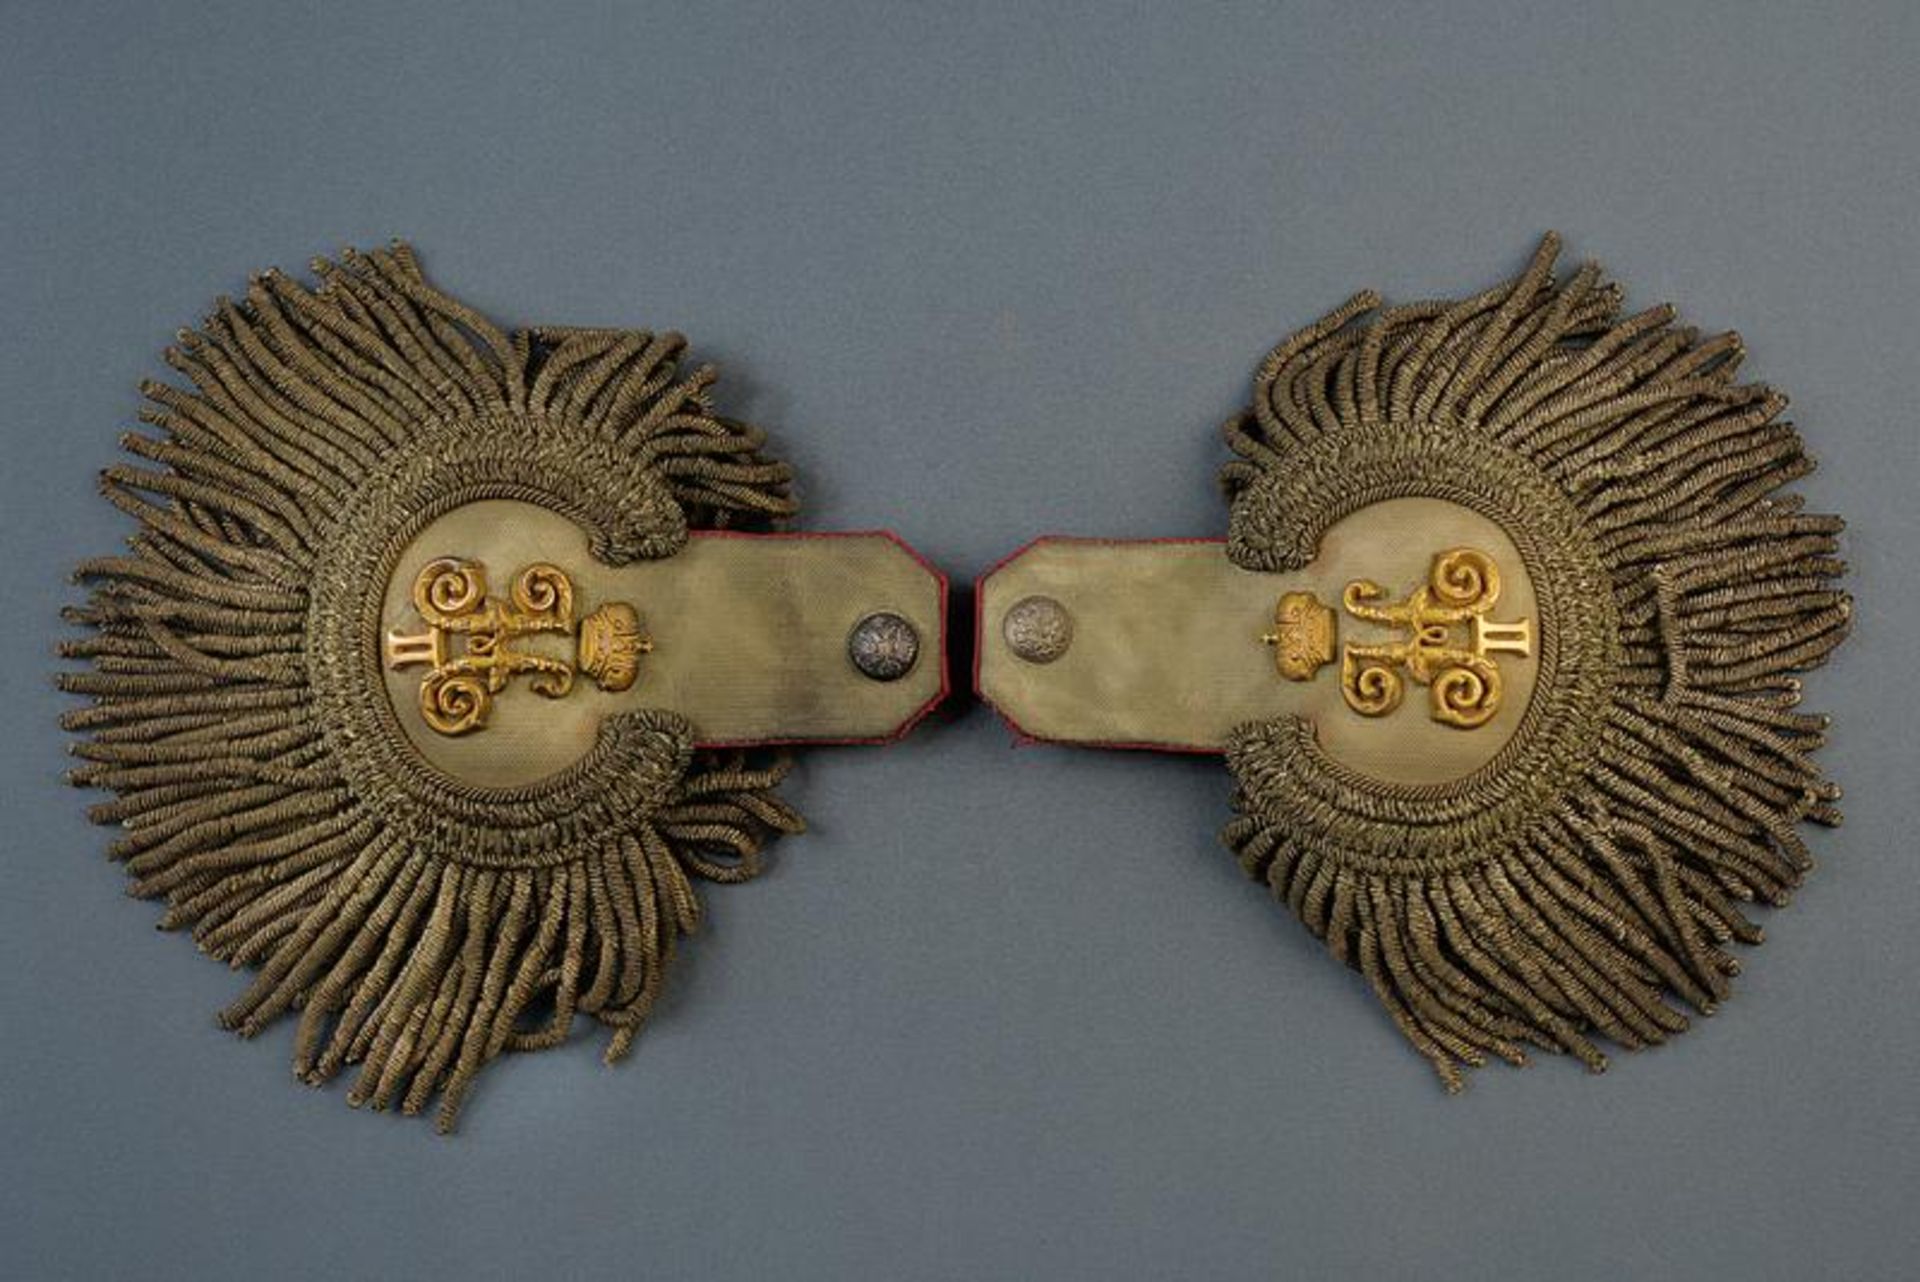 A pair of senior officer's epaulets for an Aide-de-camp